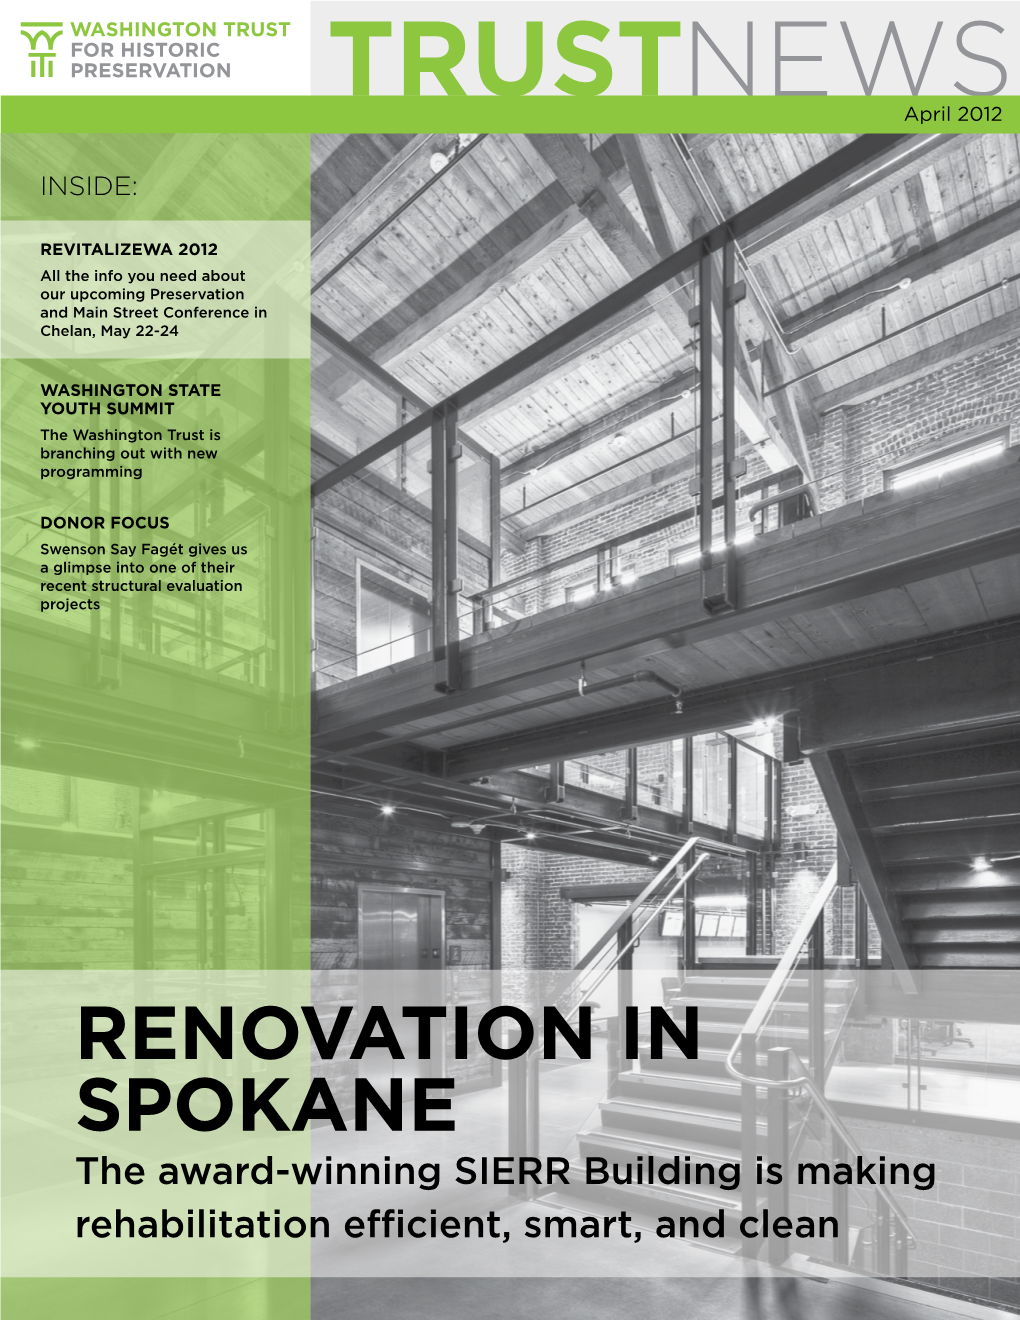 Renovation in Spokane the Award-Winning SIERR Building Is Making Rehabilitation Efficient, Smart, and Clean YOUR TRUST in ACTION Board of Directors